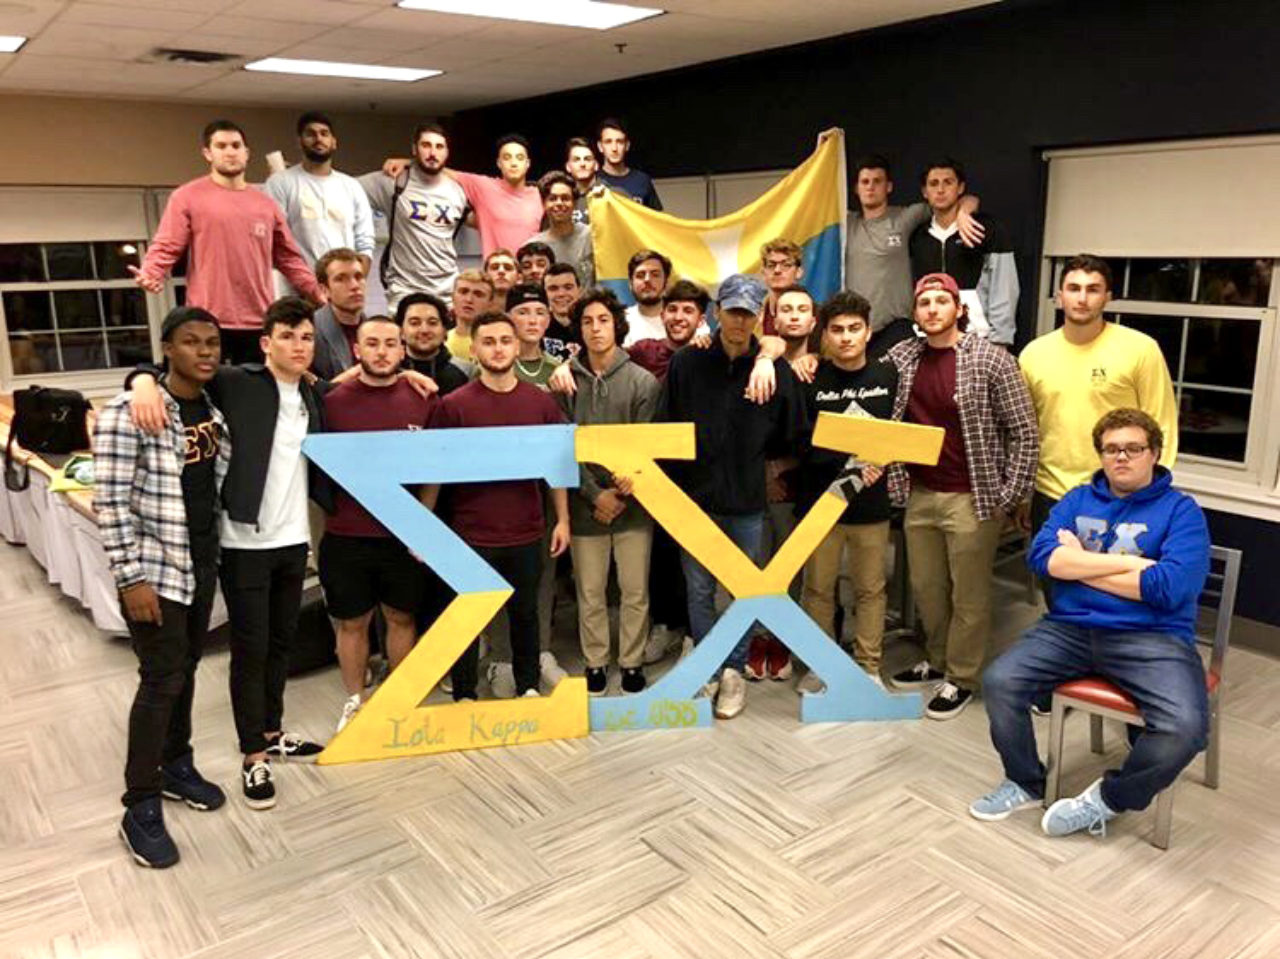 Group photo of Sigma Chi brothers in front of "Sigma" "Chi" greek letters.